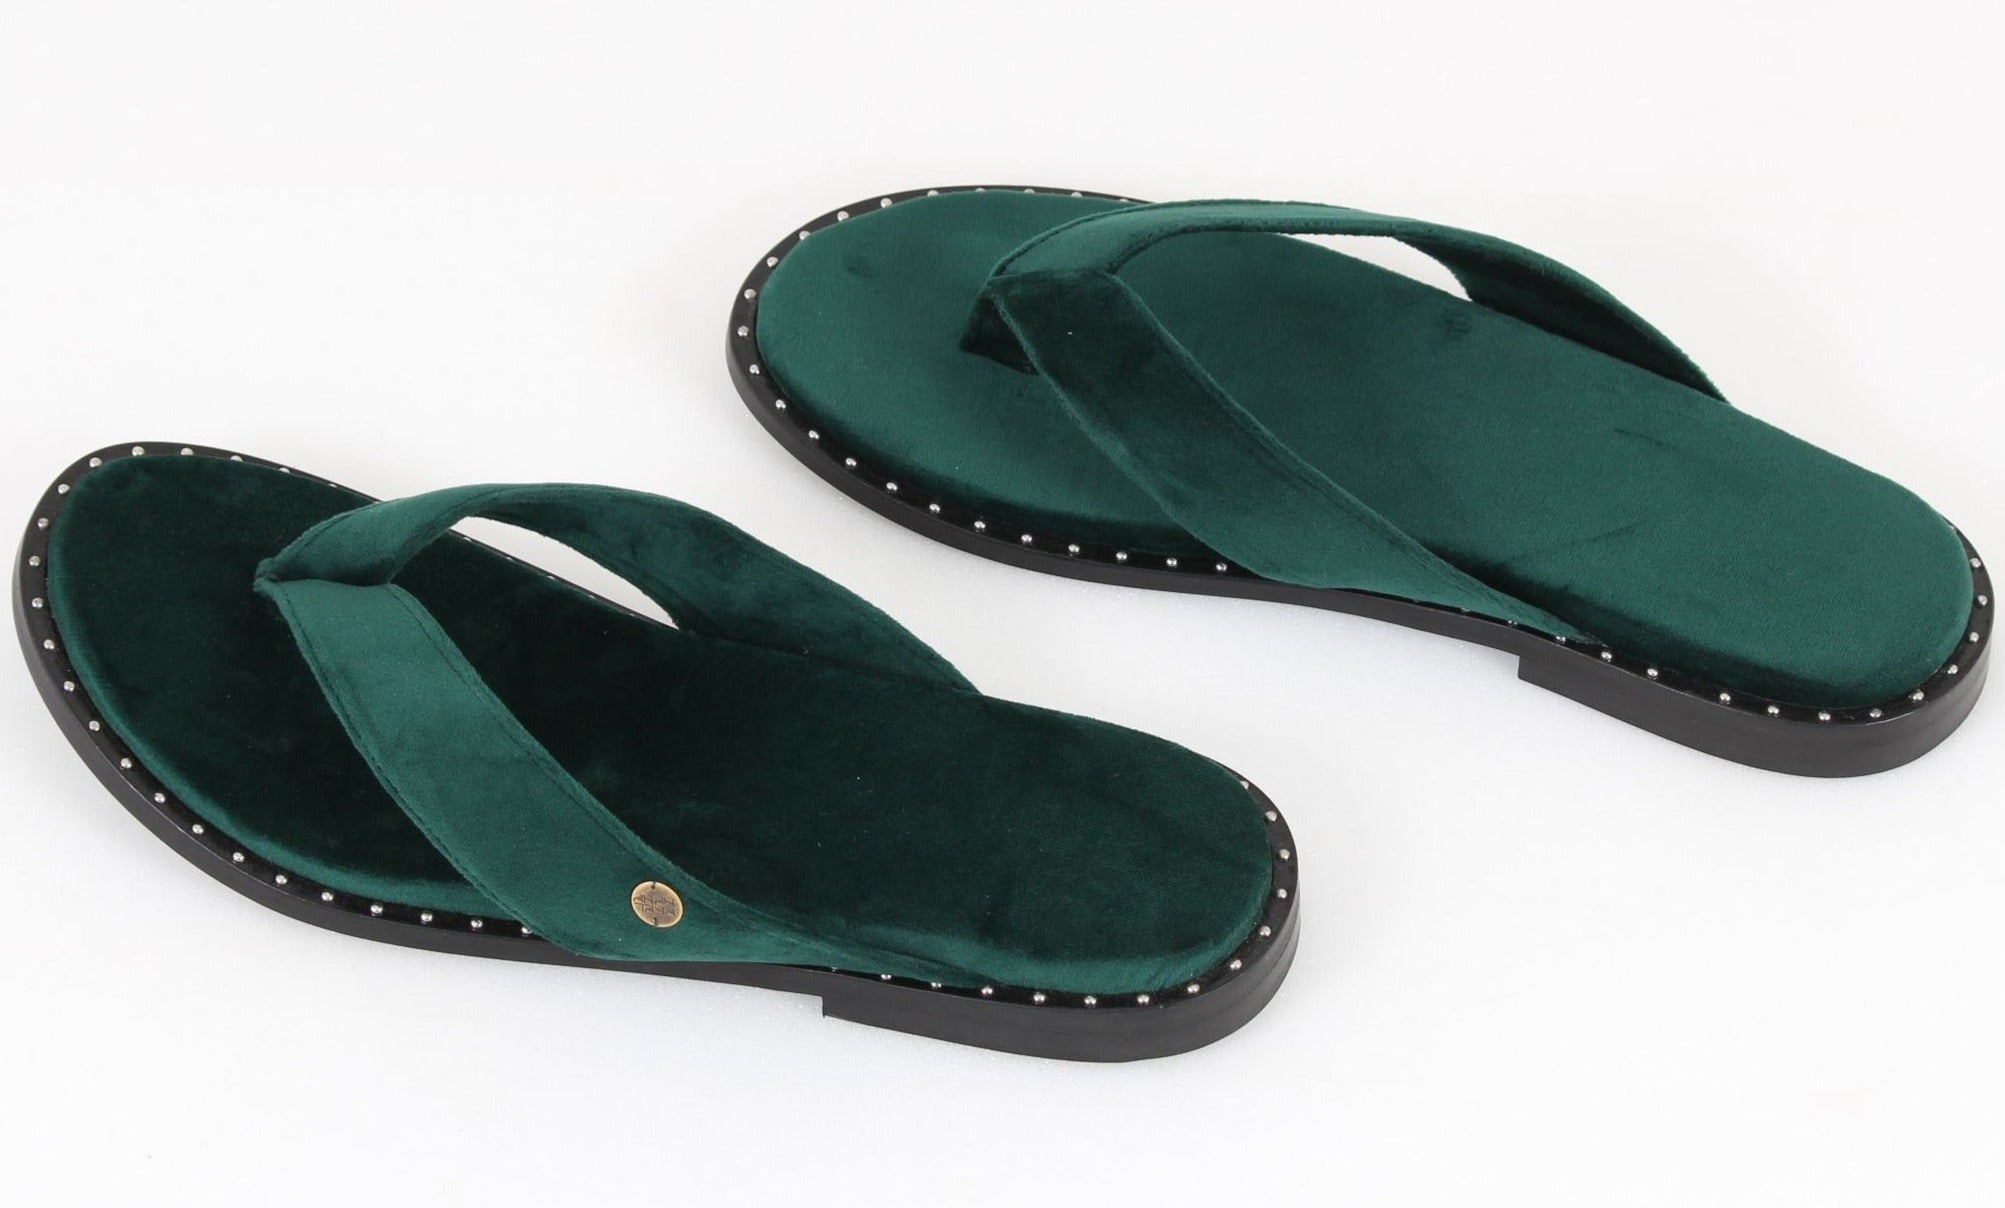 Timkee Chappal 10 Personal Care , Foot Wear, footwear, slippers, cloth slippers, handcrafted slippers, vintage slippers, soft slippers